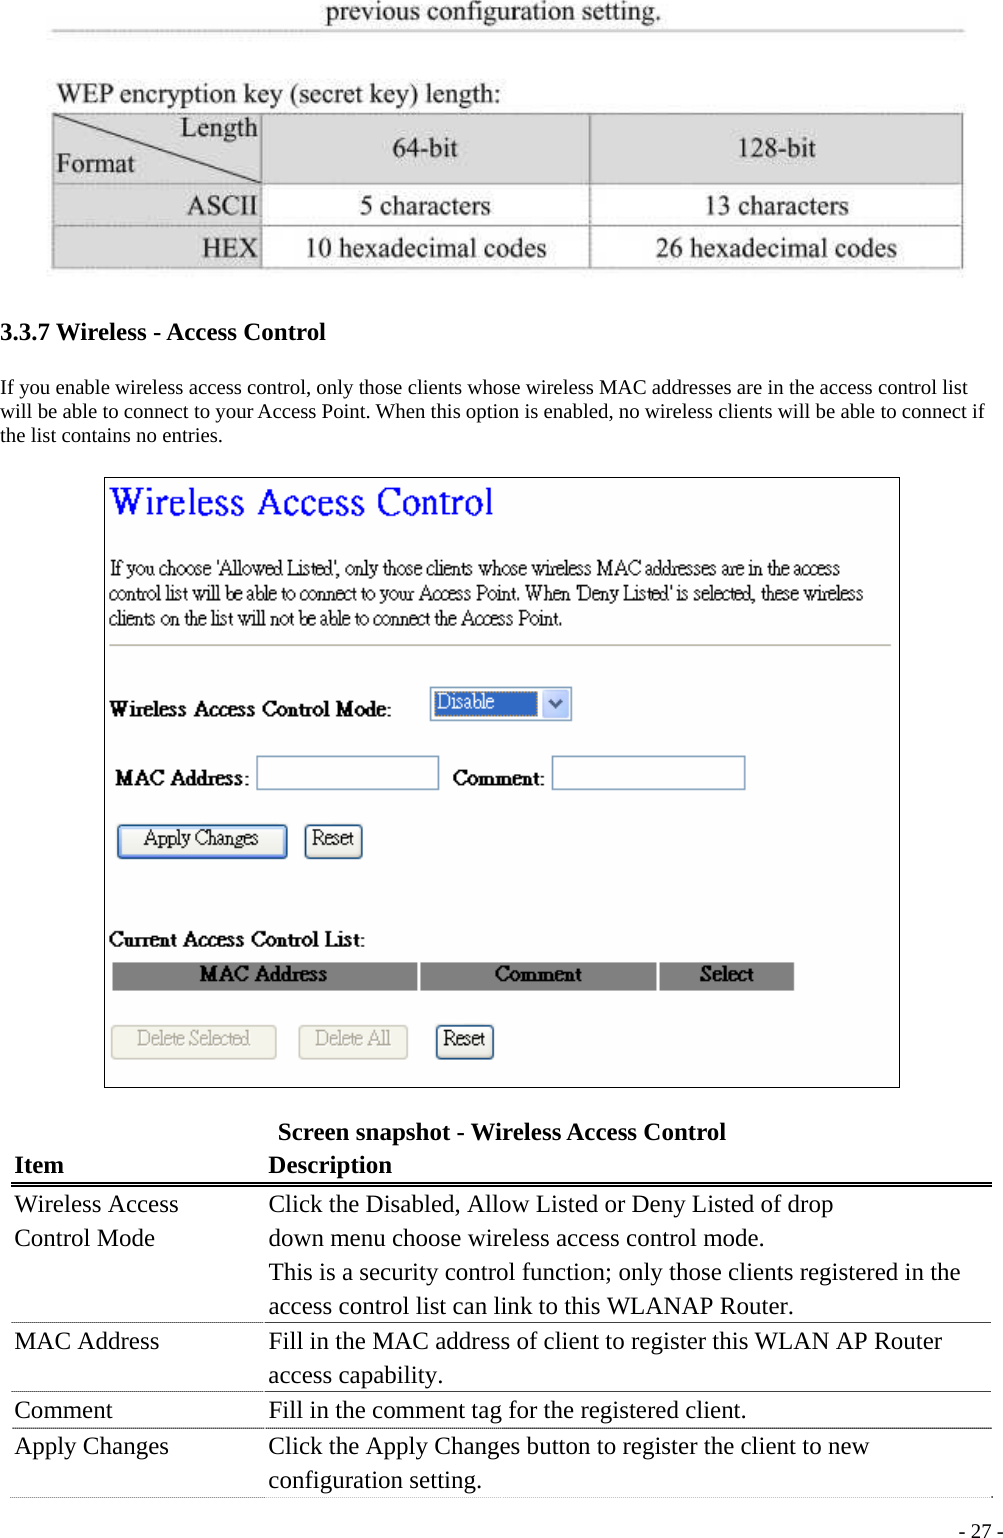  3.3.7 Wireless - Access Control If you enable wireless access control, only those clients whose wireless MAC addresses are in the access control list will be able to connect to your Access Point. When this option is enabled, no wireless clients will be able to connect if the list contains no entries.  Screen snapshot - Wireless Access Control Item Description Wireless Access Control Mode Click the Disabled, Allow Listed or Deny Listed of drop down menu choose wireless access control mode. This is a security control function; only those clients registered in the access control list can link to this WLANAP Router. MAC Address  Fill in the MAC address of client to register this WLAN AP Router access capability. Comment  Fill in the comment tag for the registered client. Apply Changes      Click the Apply Changes button to register the client to new configuration setting.  - 27 -